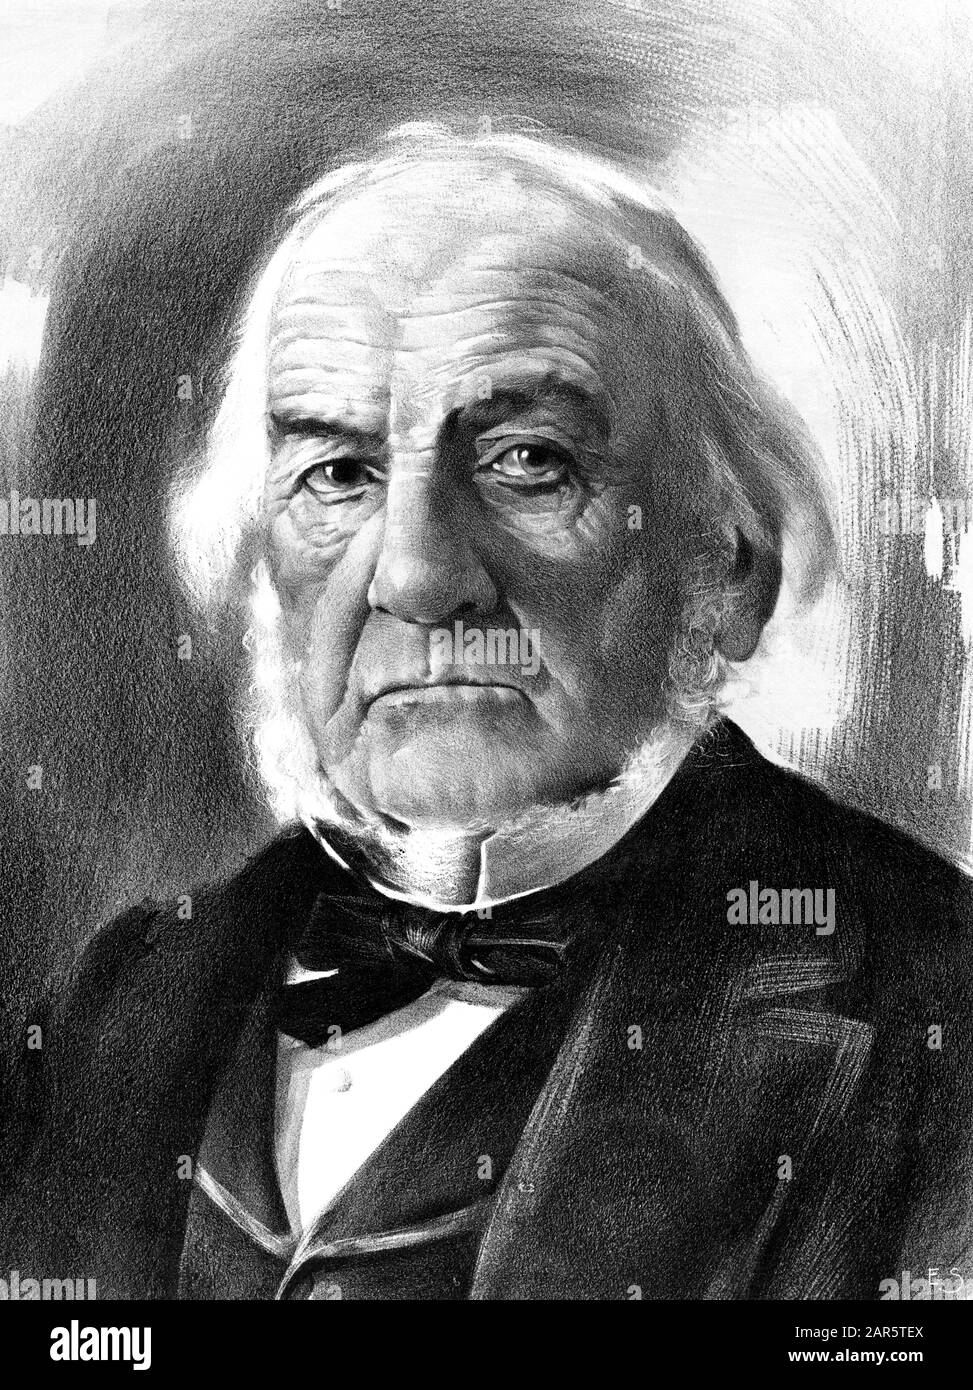 Vintage portrait of William Ewart Gladstone (1809 – 1898) – the British Liberal politician who served as Prime Minister of the United Kingdom on four occasions between 1868 and 1894. Print circa 1893 by Chicago Bank Note Co. Stock Photo